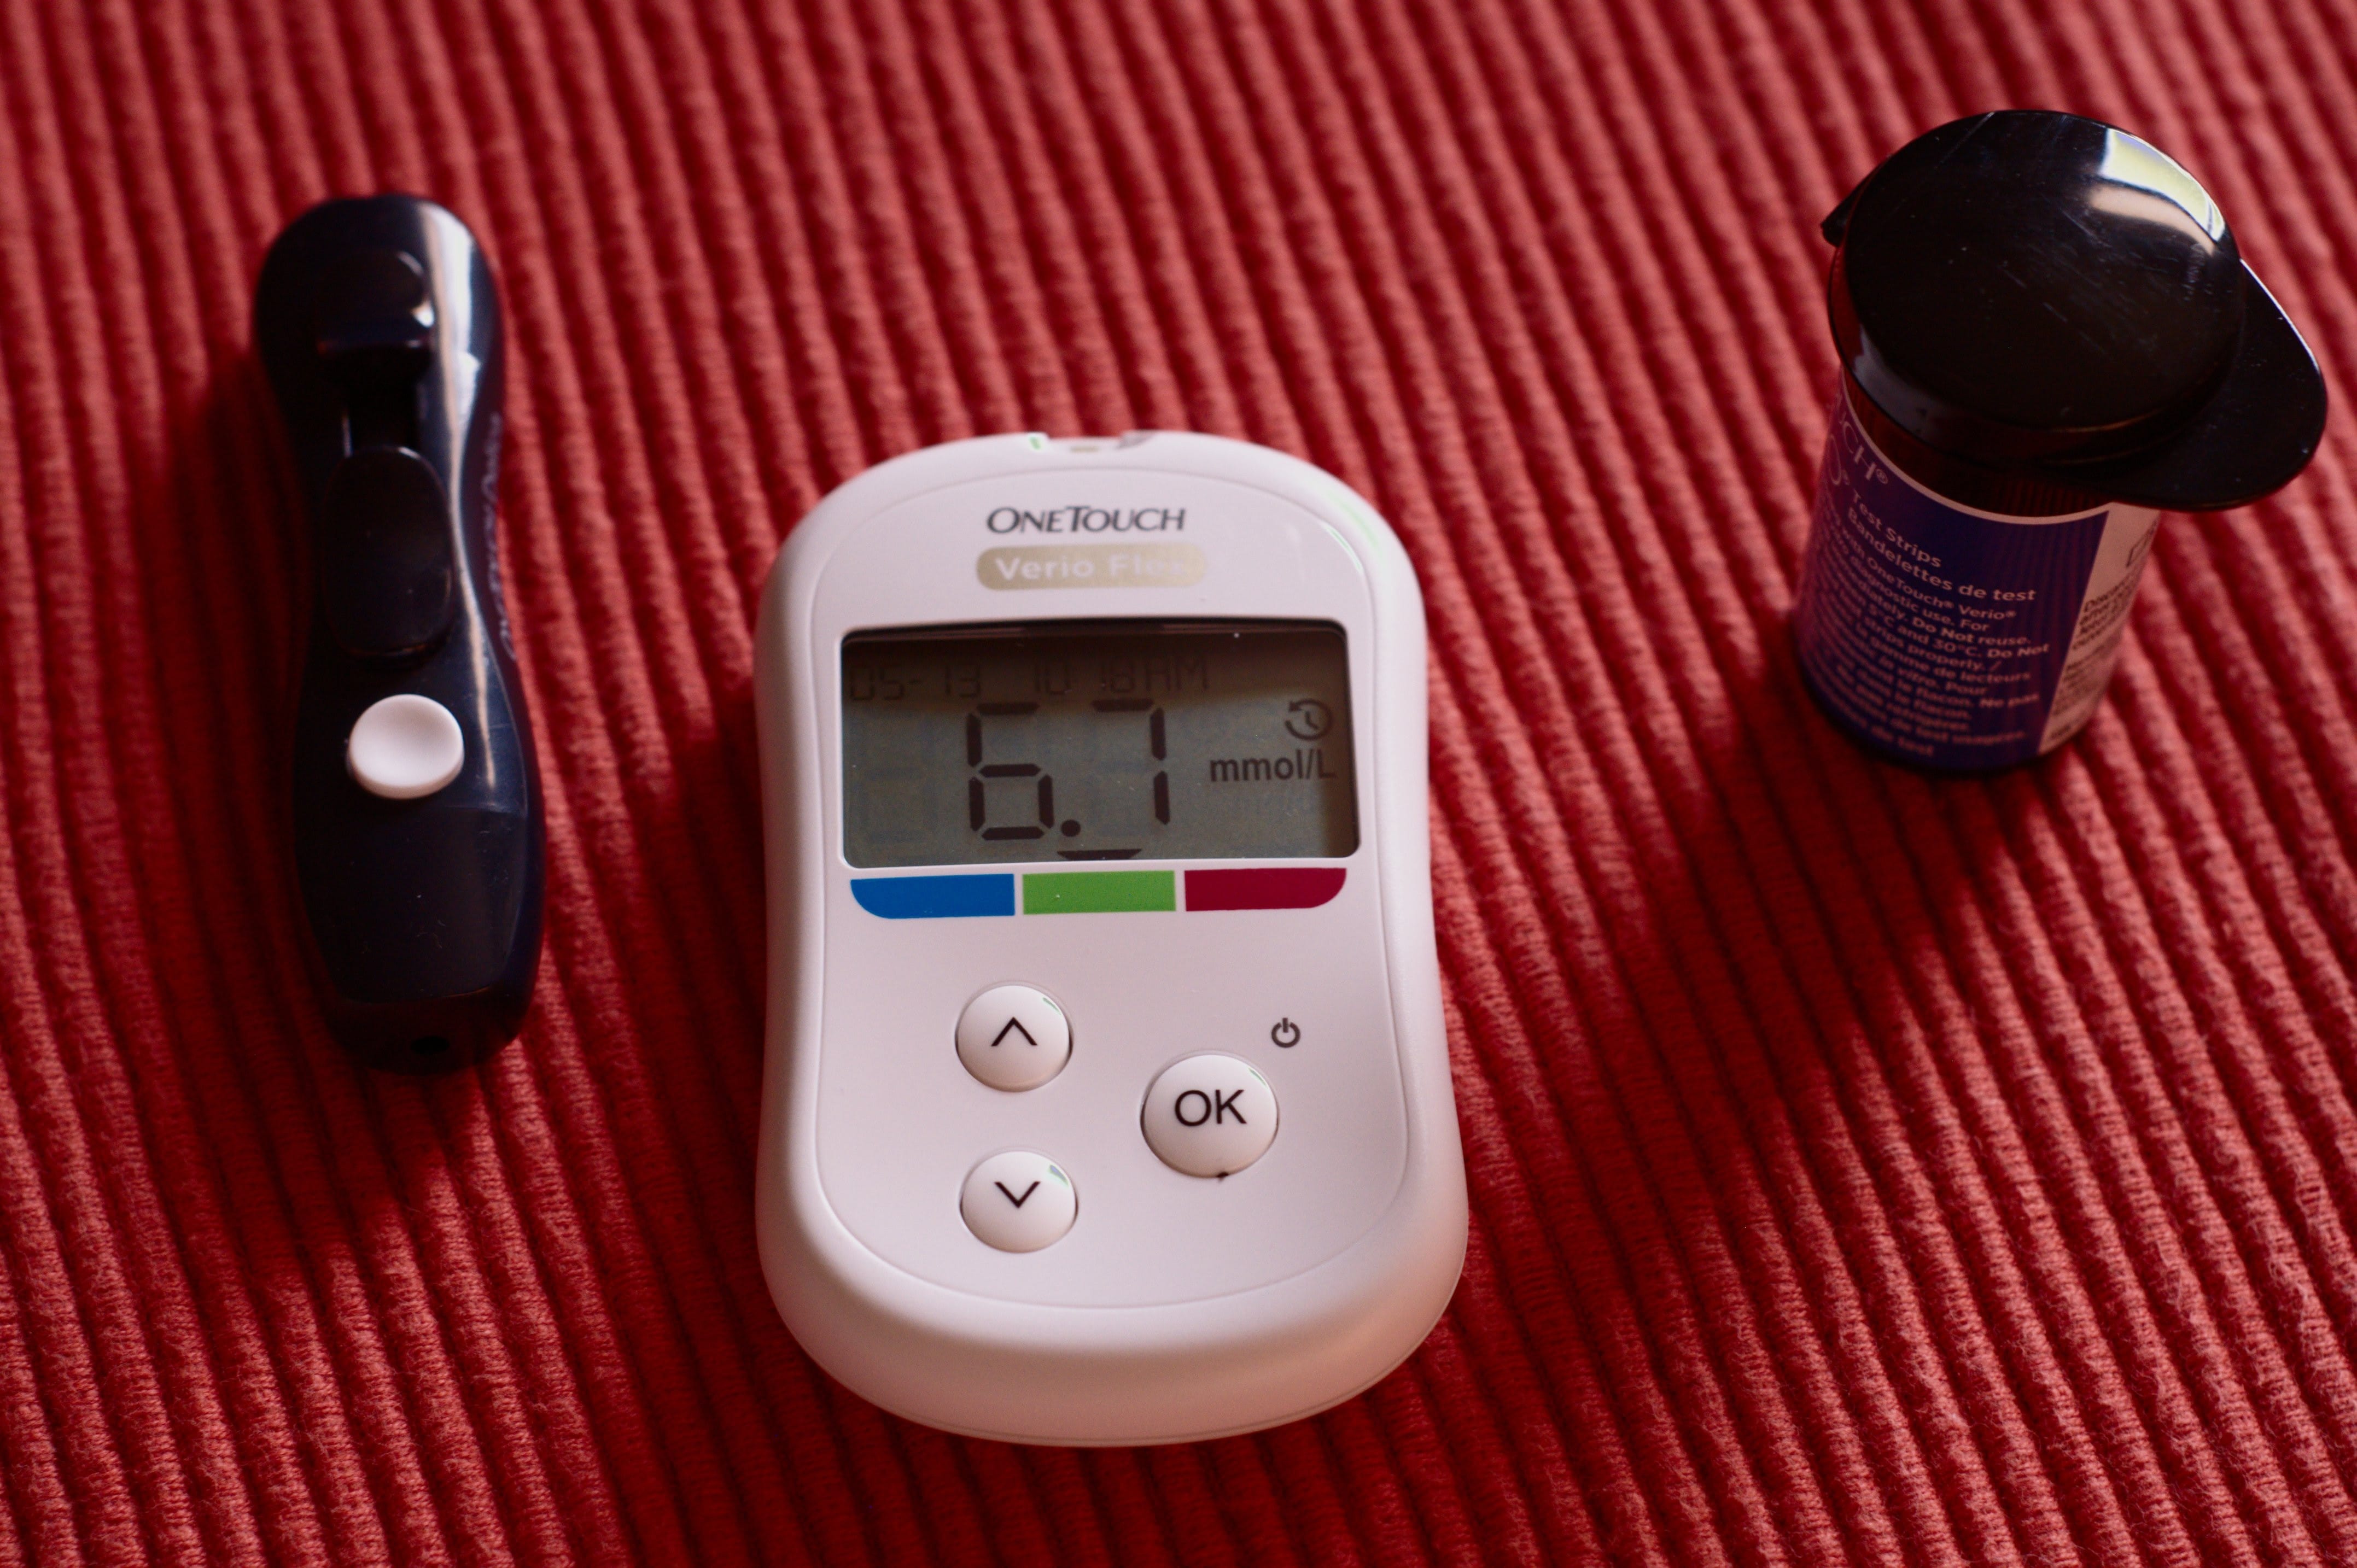 White One Touch blood sugar monitor at 6.7; image by Kate, via Unsplash.com.